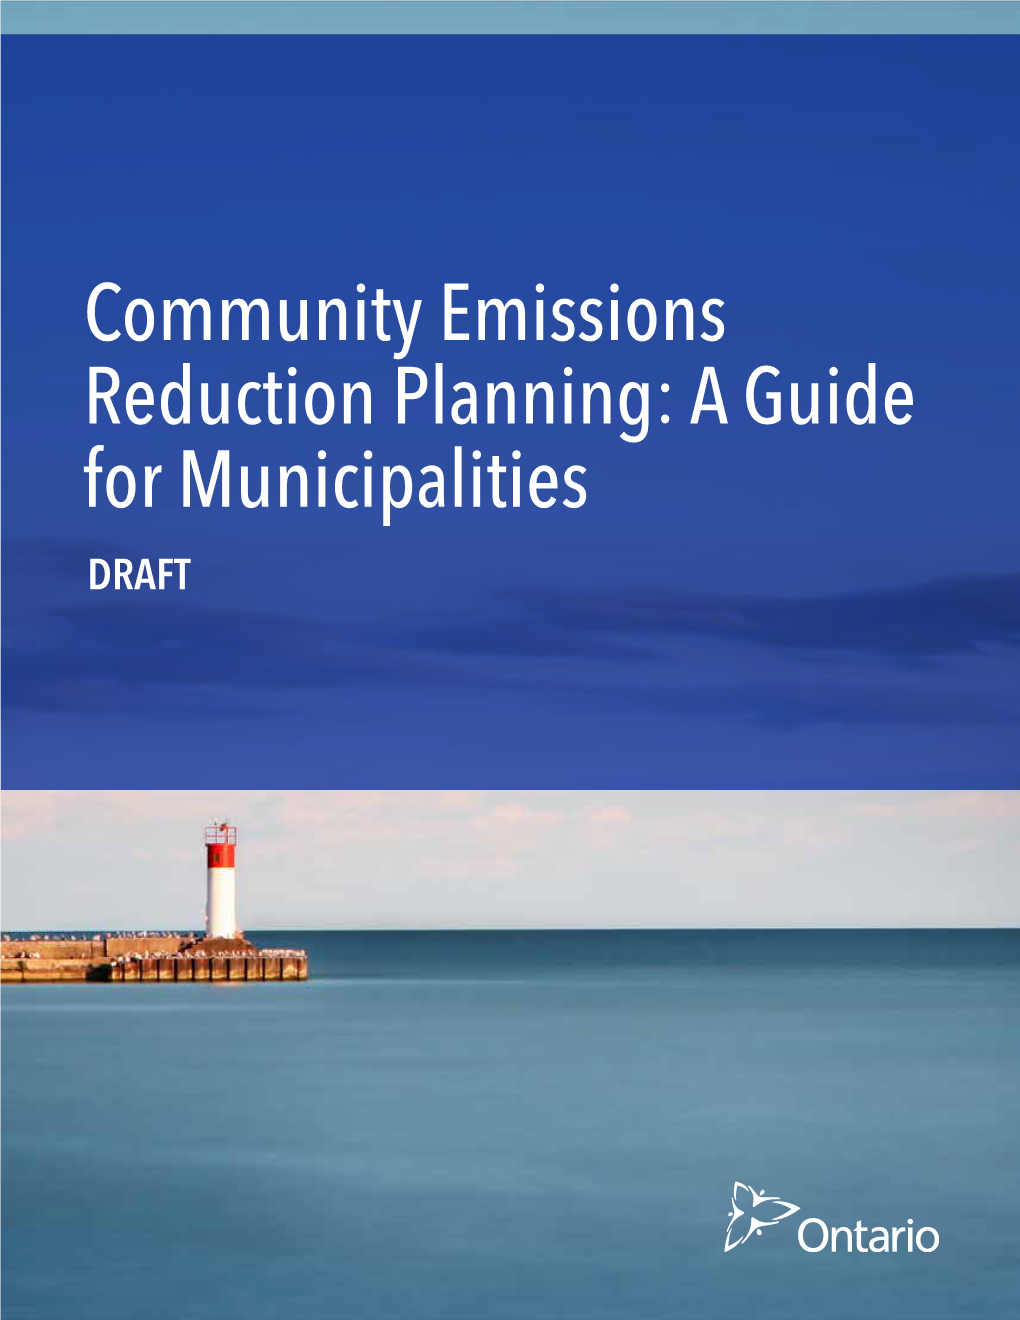 Community Emissions Reduction Planning: a Guide for Municipalities DRAFT DECEMBER 2017